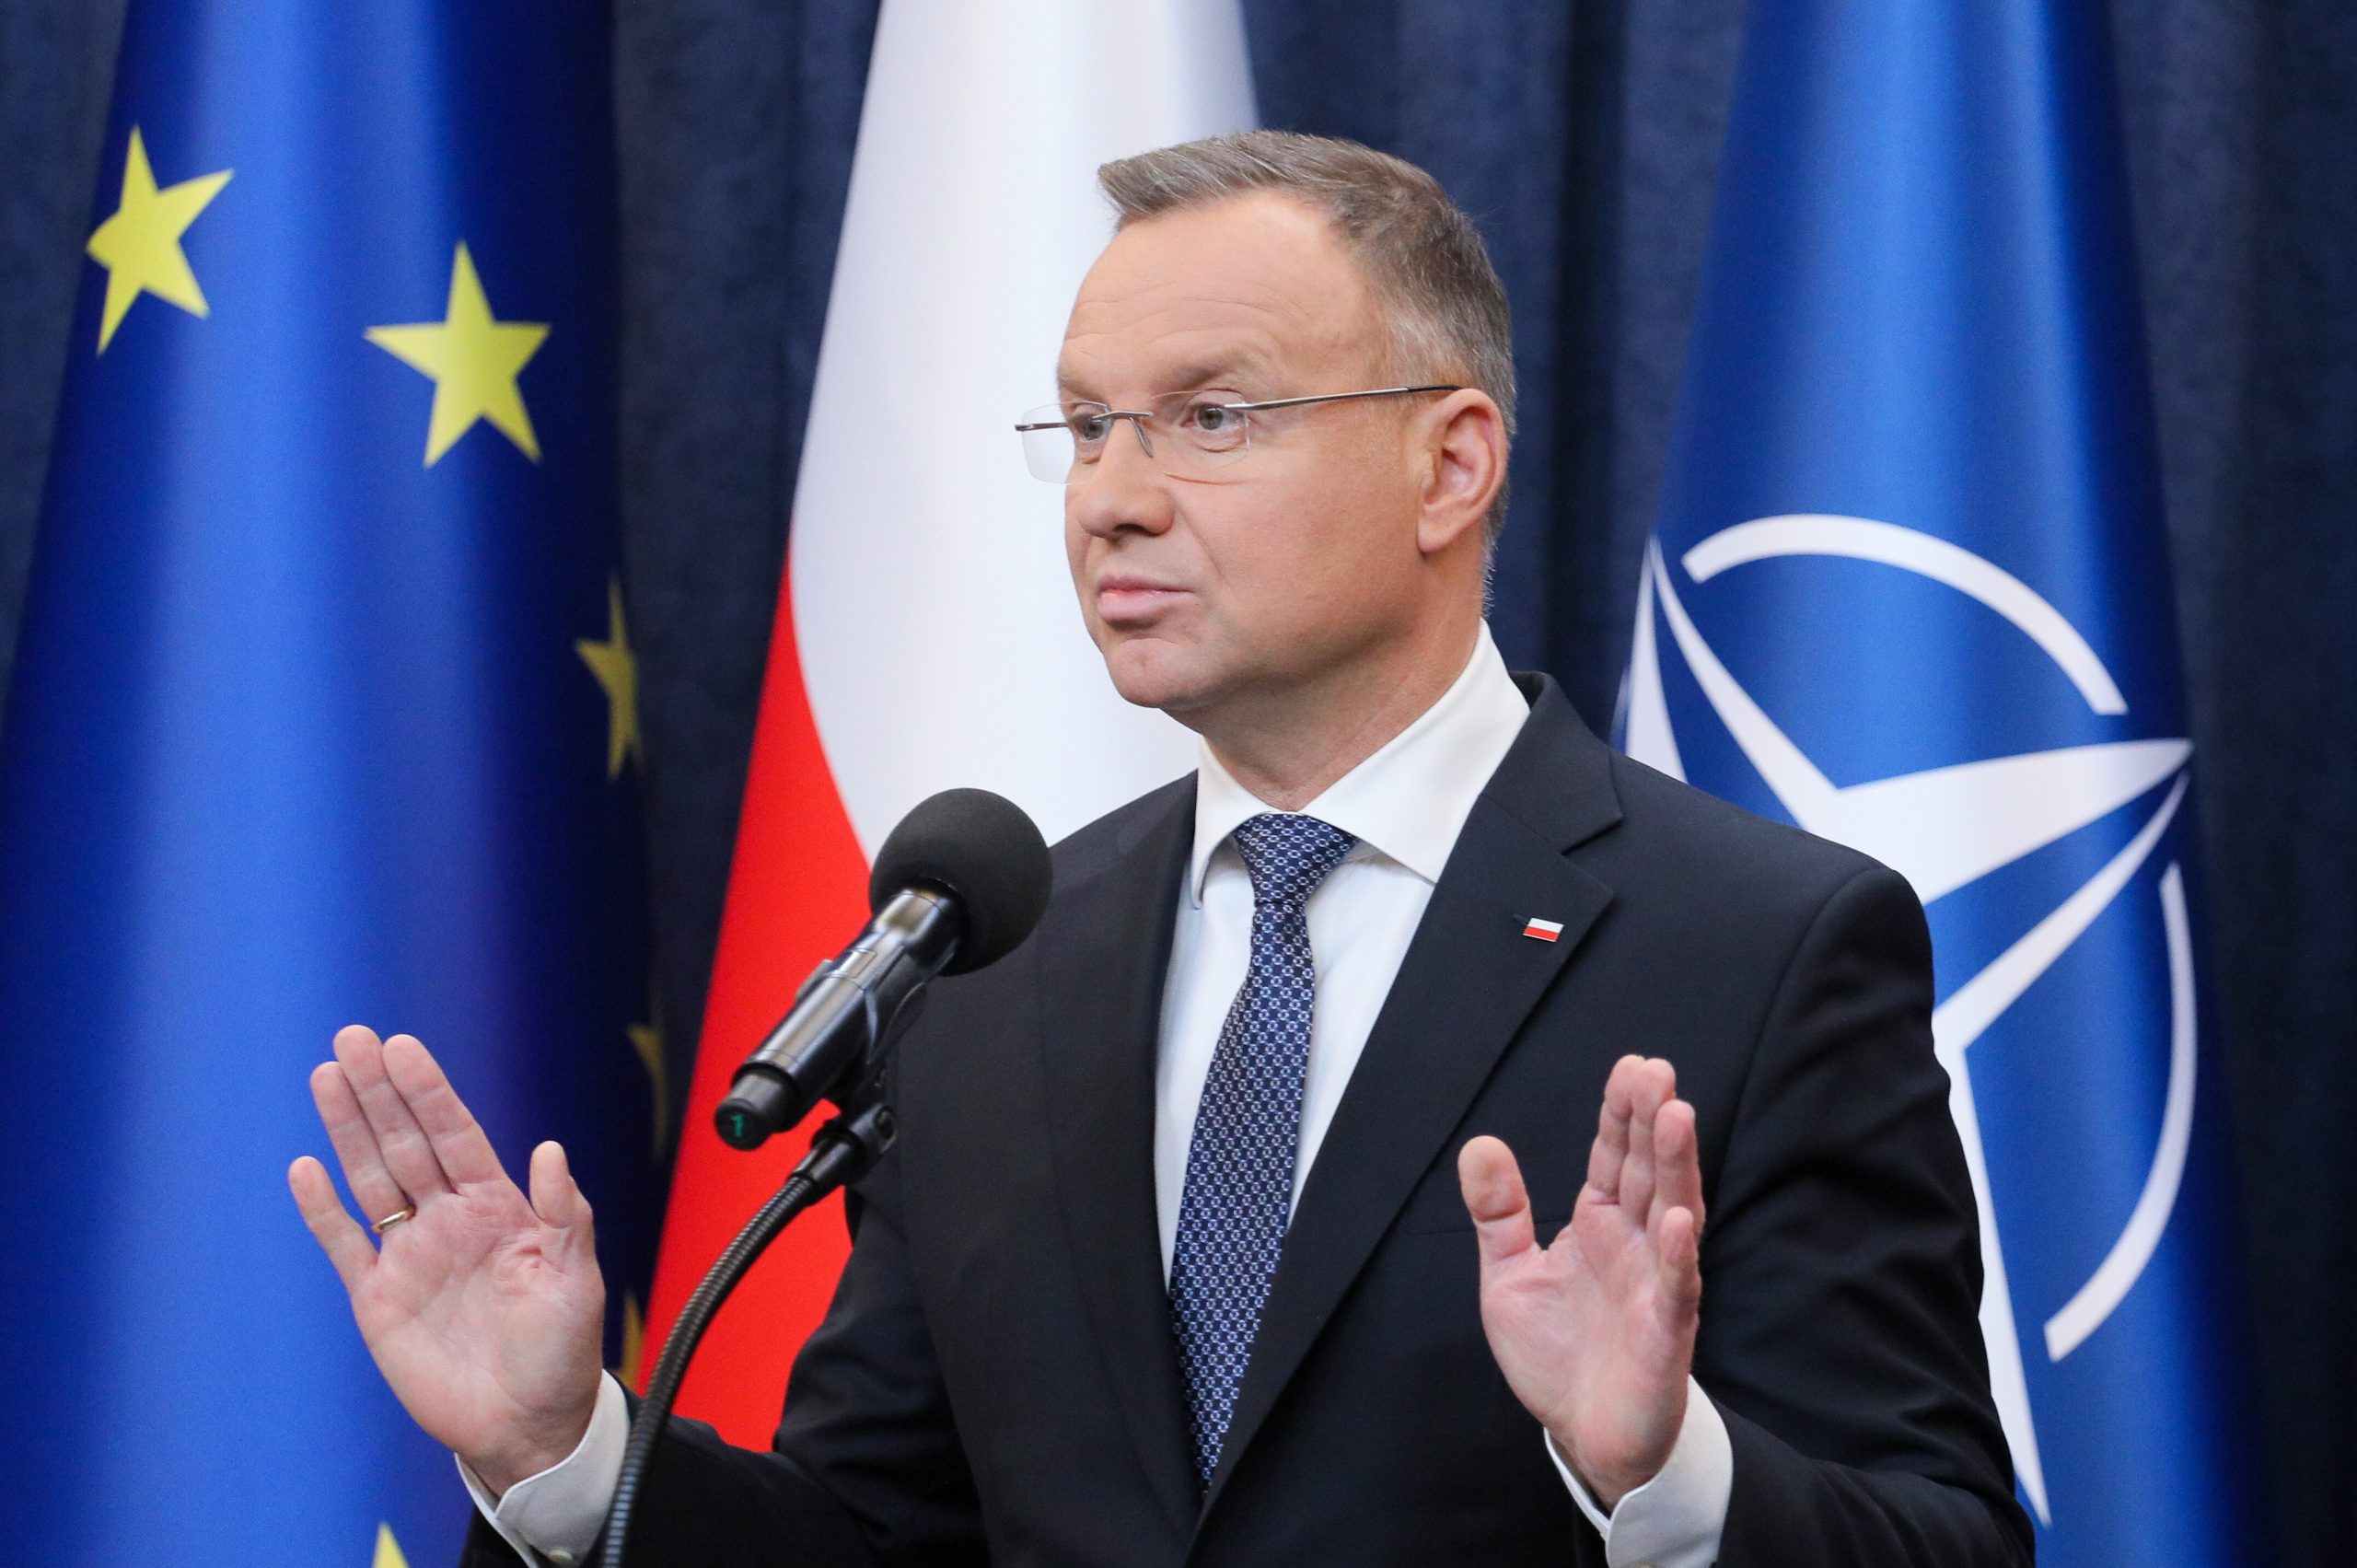 epa10940155 Polish President Andrzej Duda gestures during a press conference at the Presidential Palace in Warsaw, Poland, 26 October 2023. President Andrzej Duda named Donald Tusk, the opposition leader, and Mateusz Morawiecki, the current prime minister, as candidates for prime minister in the new government. The president's announcement follows two days of talks with party representatives, and, according to the president, the first time that two candidates for prime minister have been named.  EPA/Pawel Supernak POLAND OUT